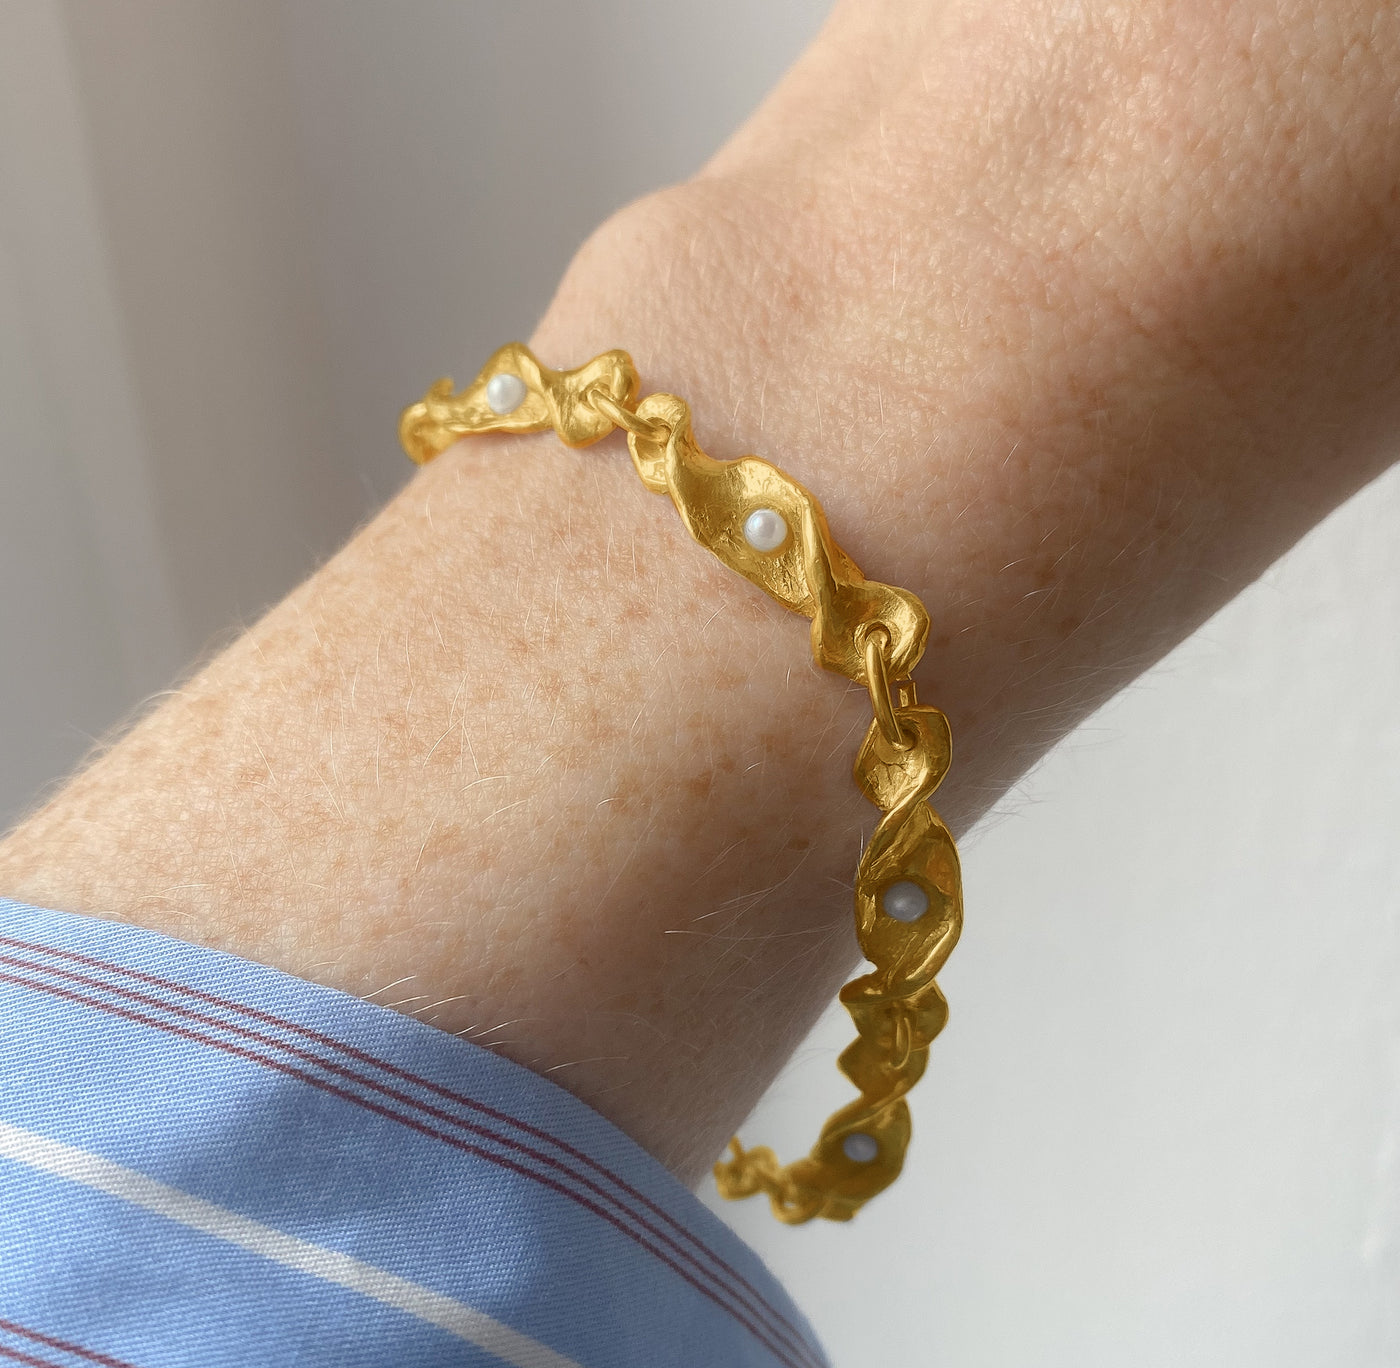 GULSVIK // Bracelet made of gold-plated fine silver with delicate pearls